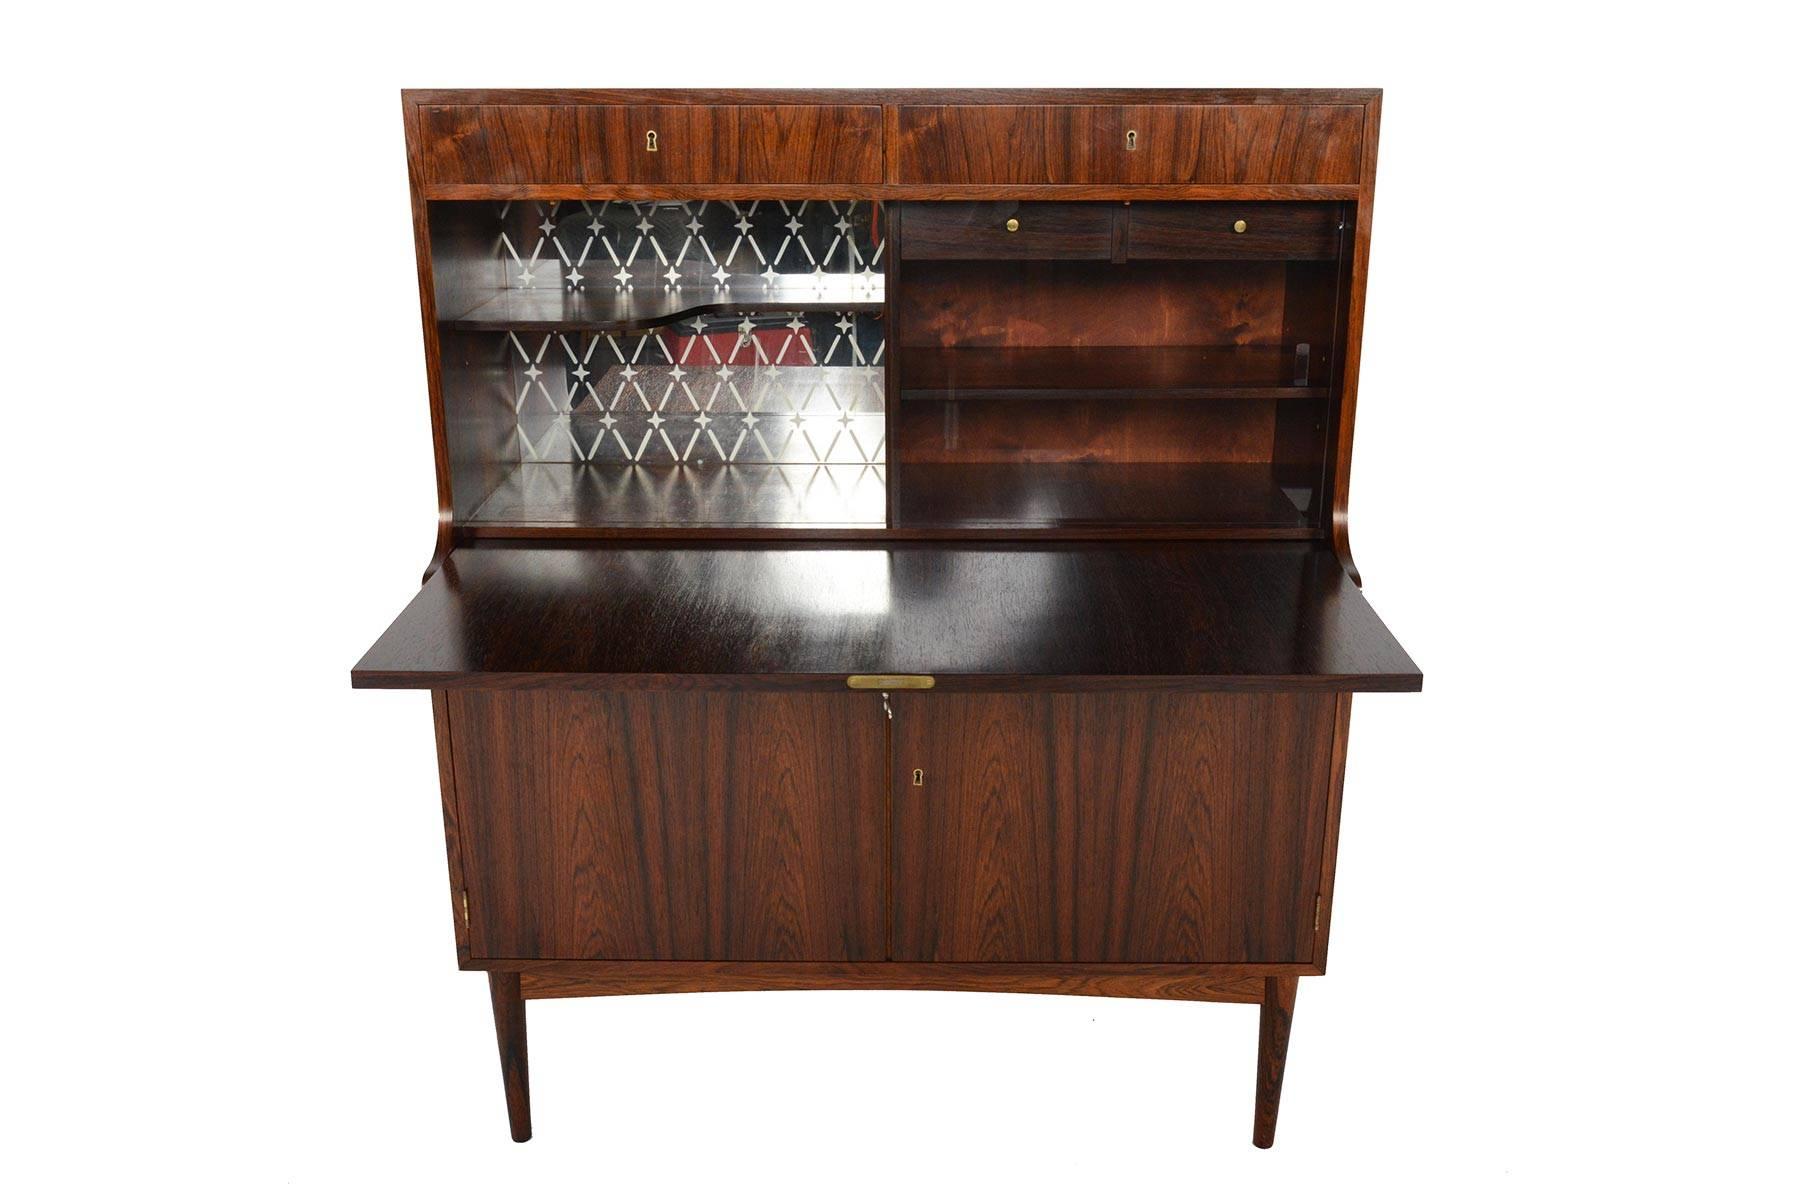 This astounding Danish modern secretary desk in rosewood is a jack of all trades! The centre of this piece features a pullout desk and provides a spacious work surface. Once the door is lowered, a beautiful etched mirror bar with shelving sits to